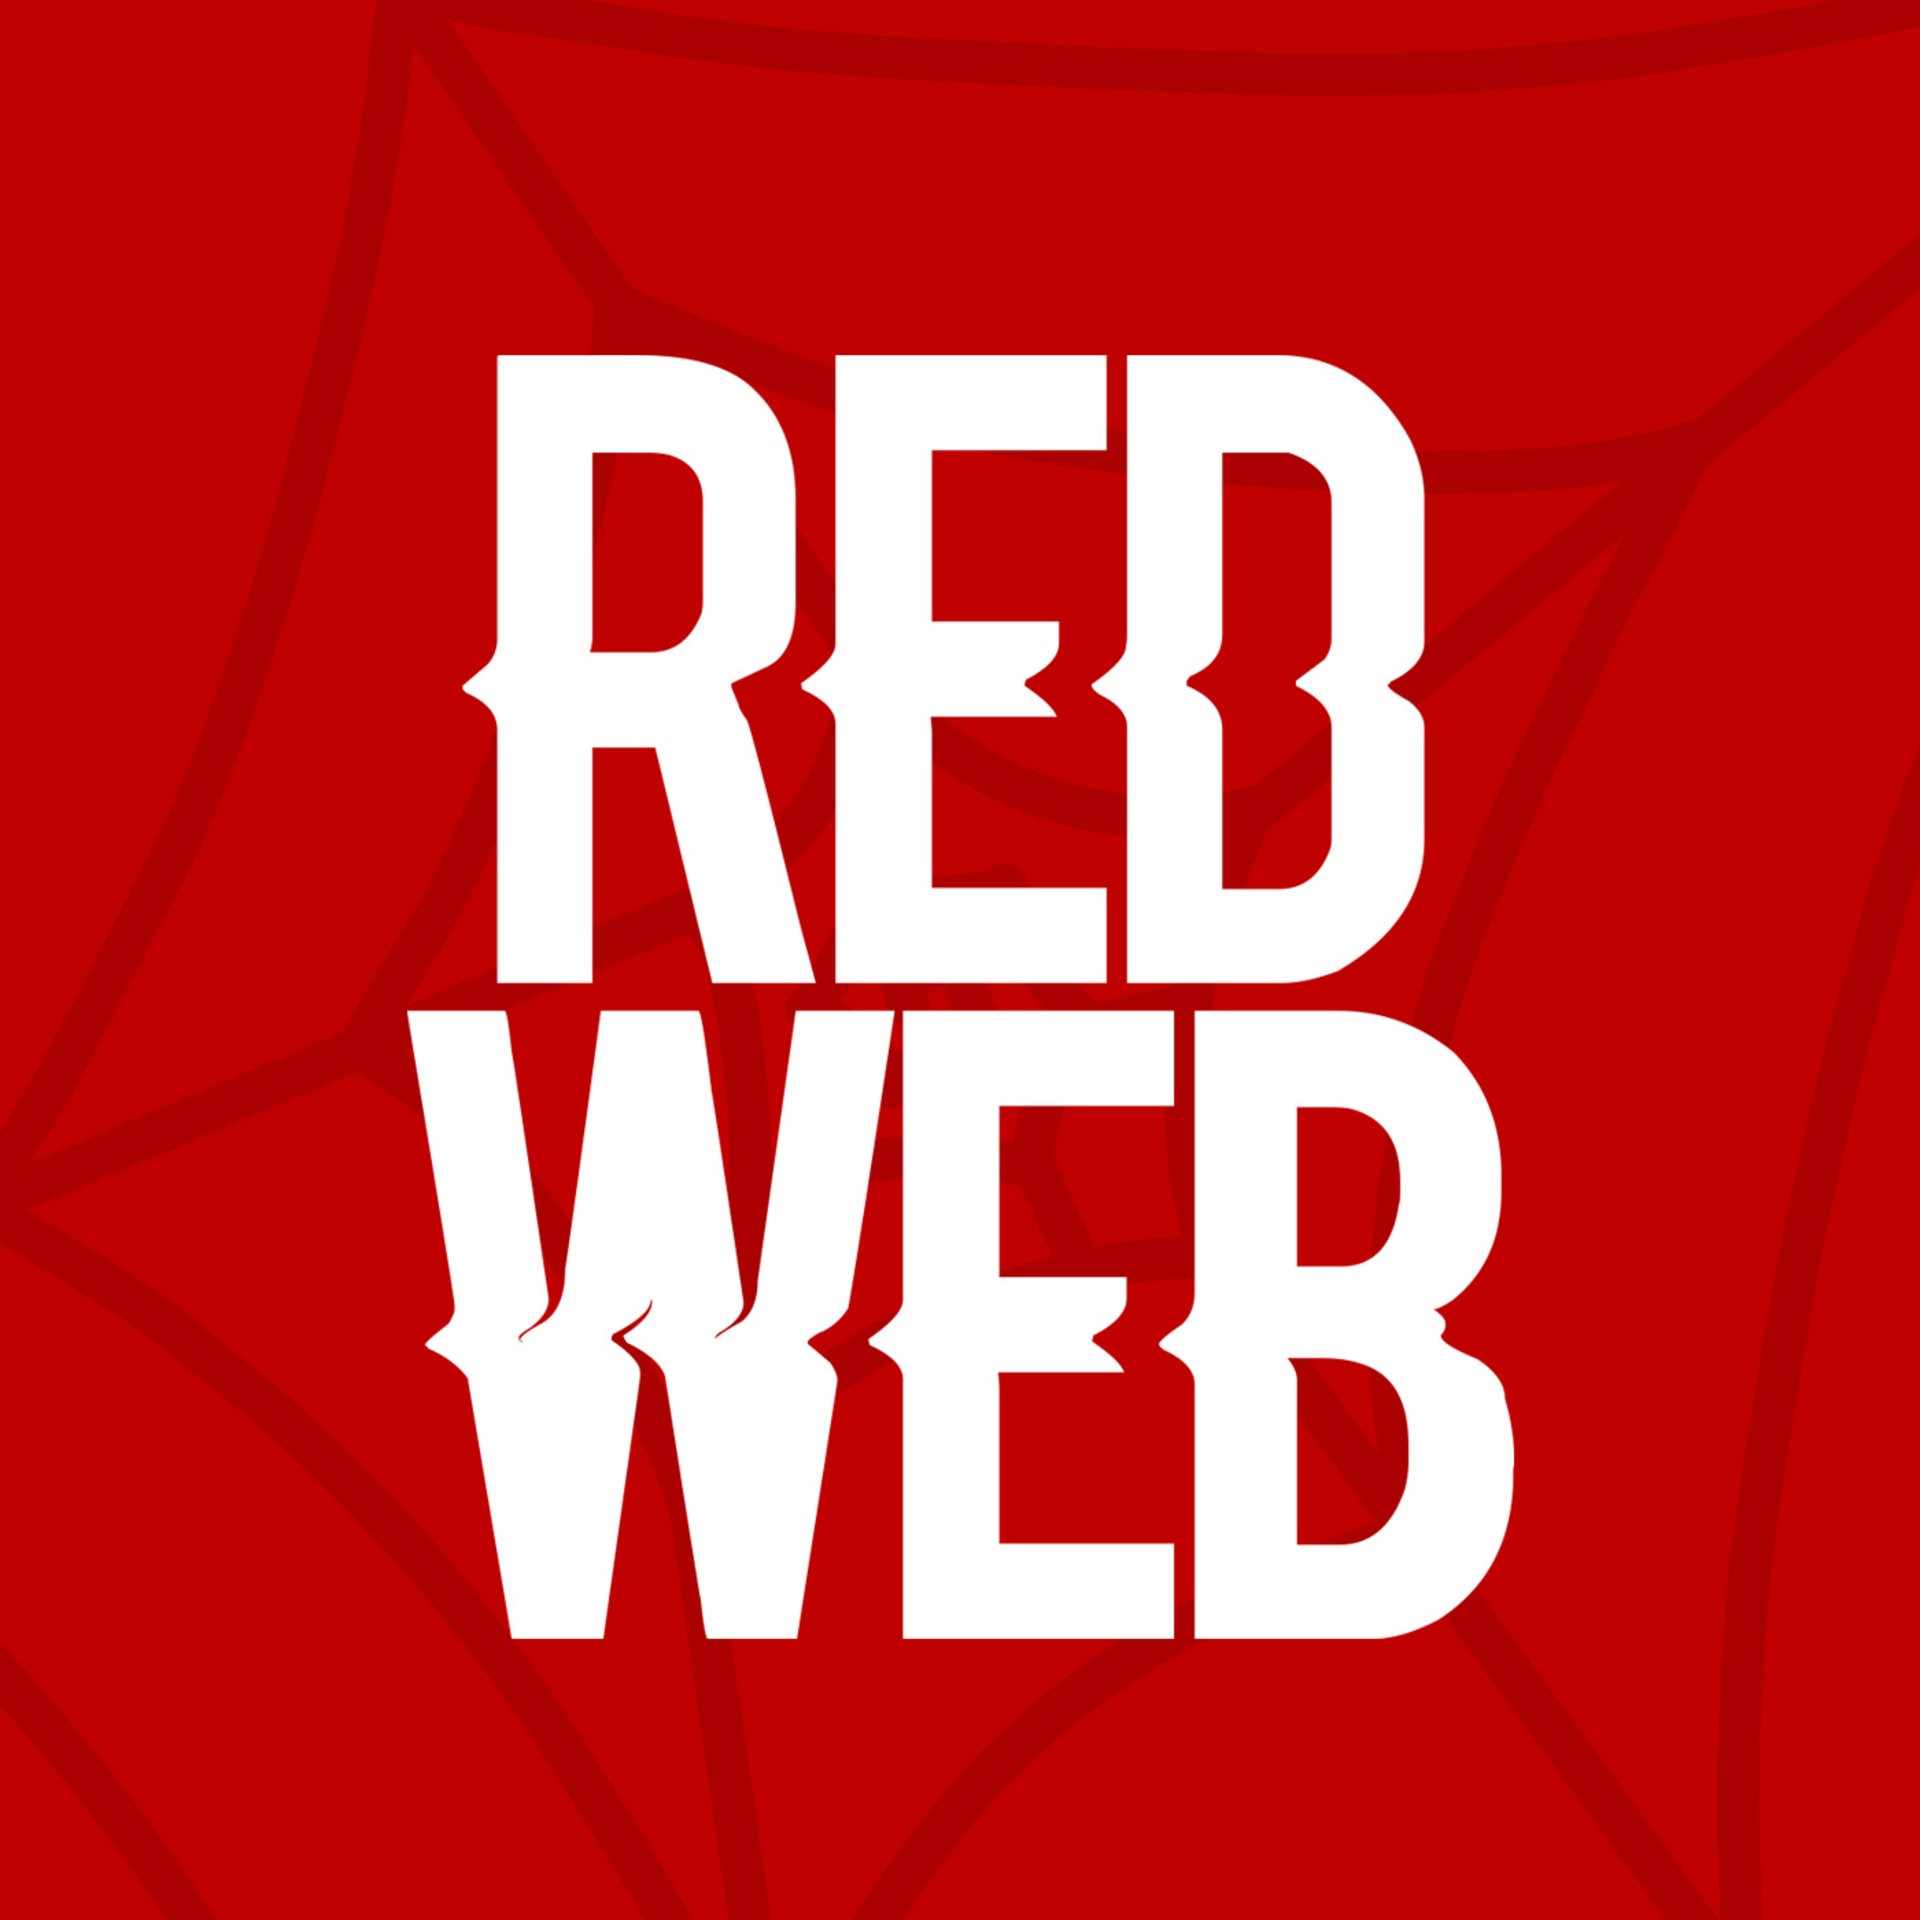 Series Red Web - Rooster